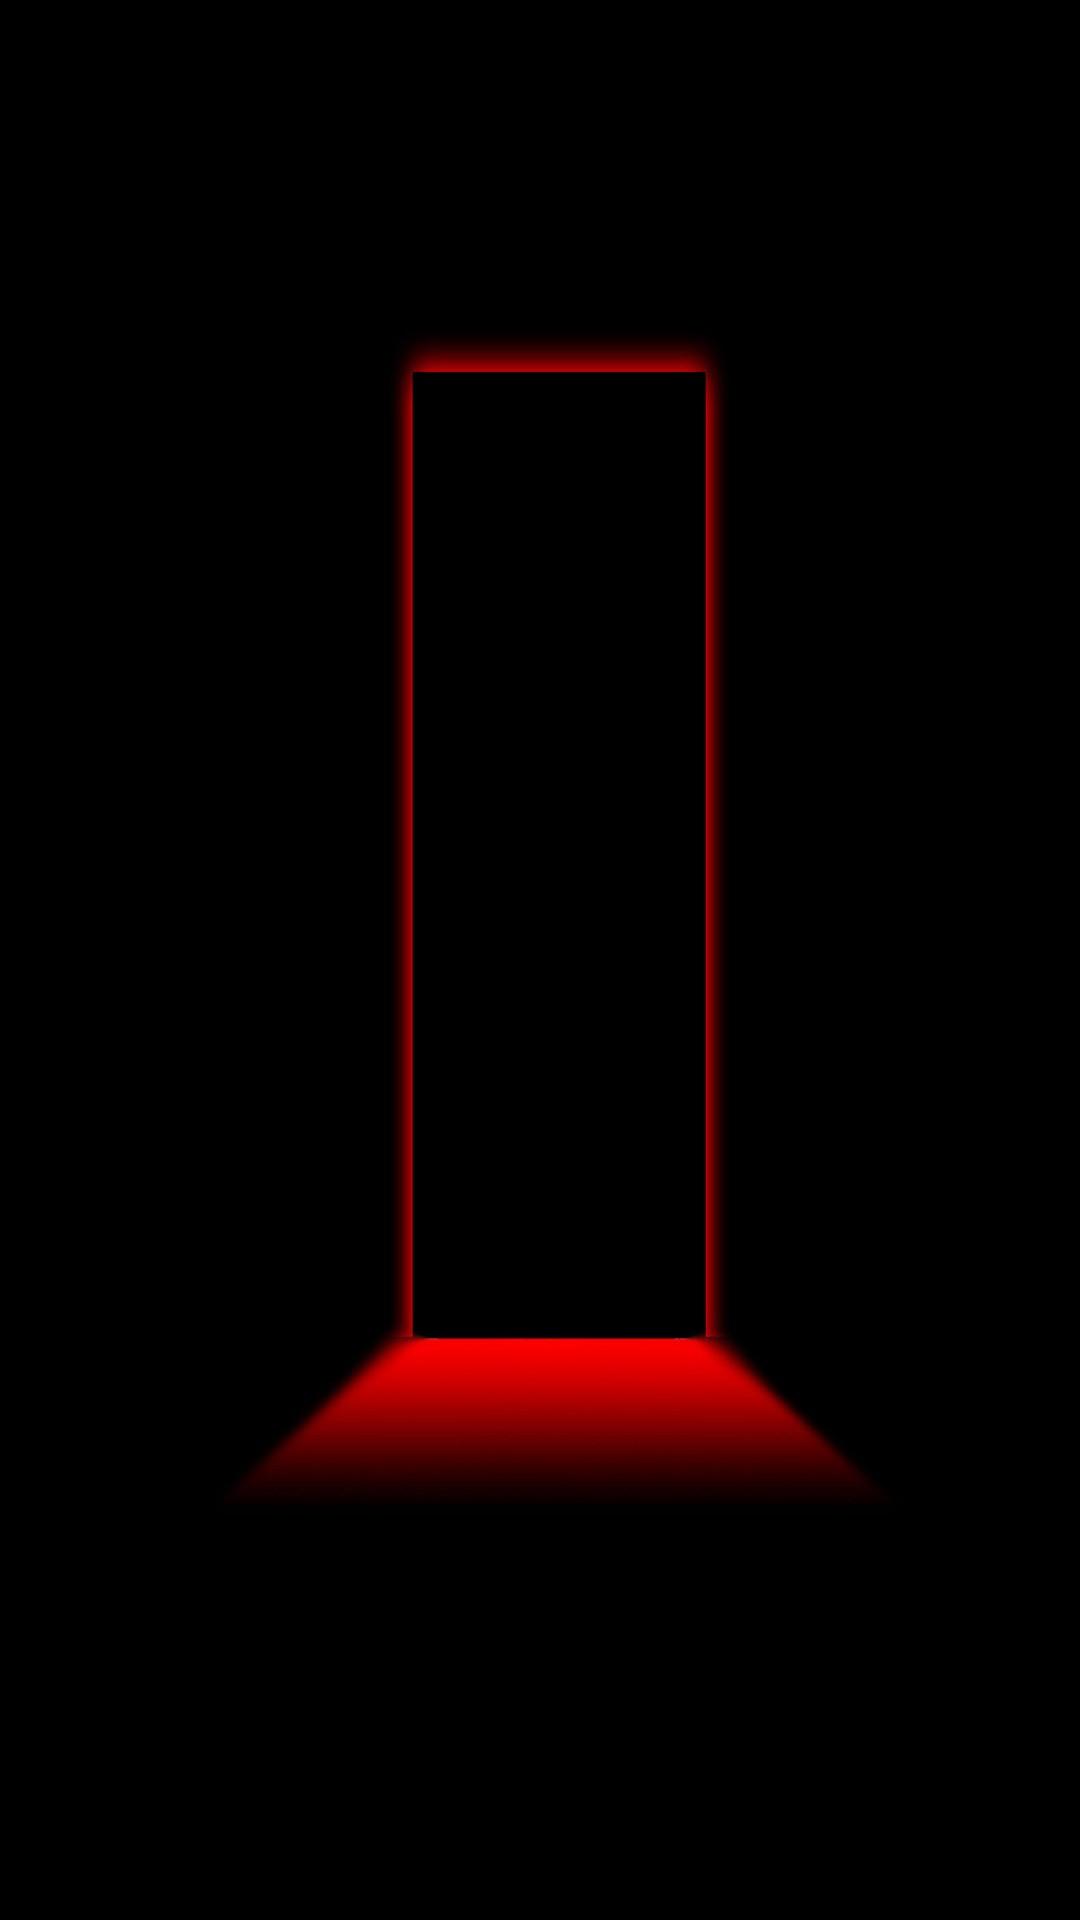 3D Black and Red iPhone Wallpaper 3D iPhone Wallpaper